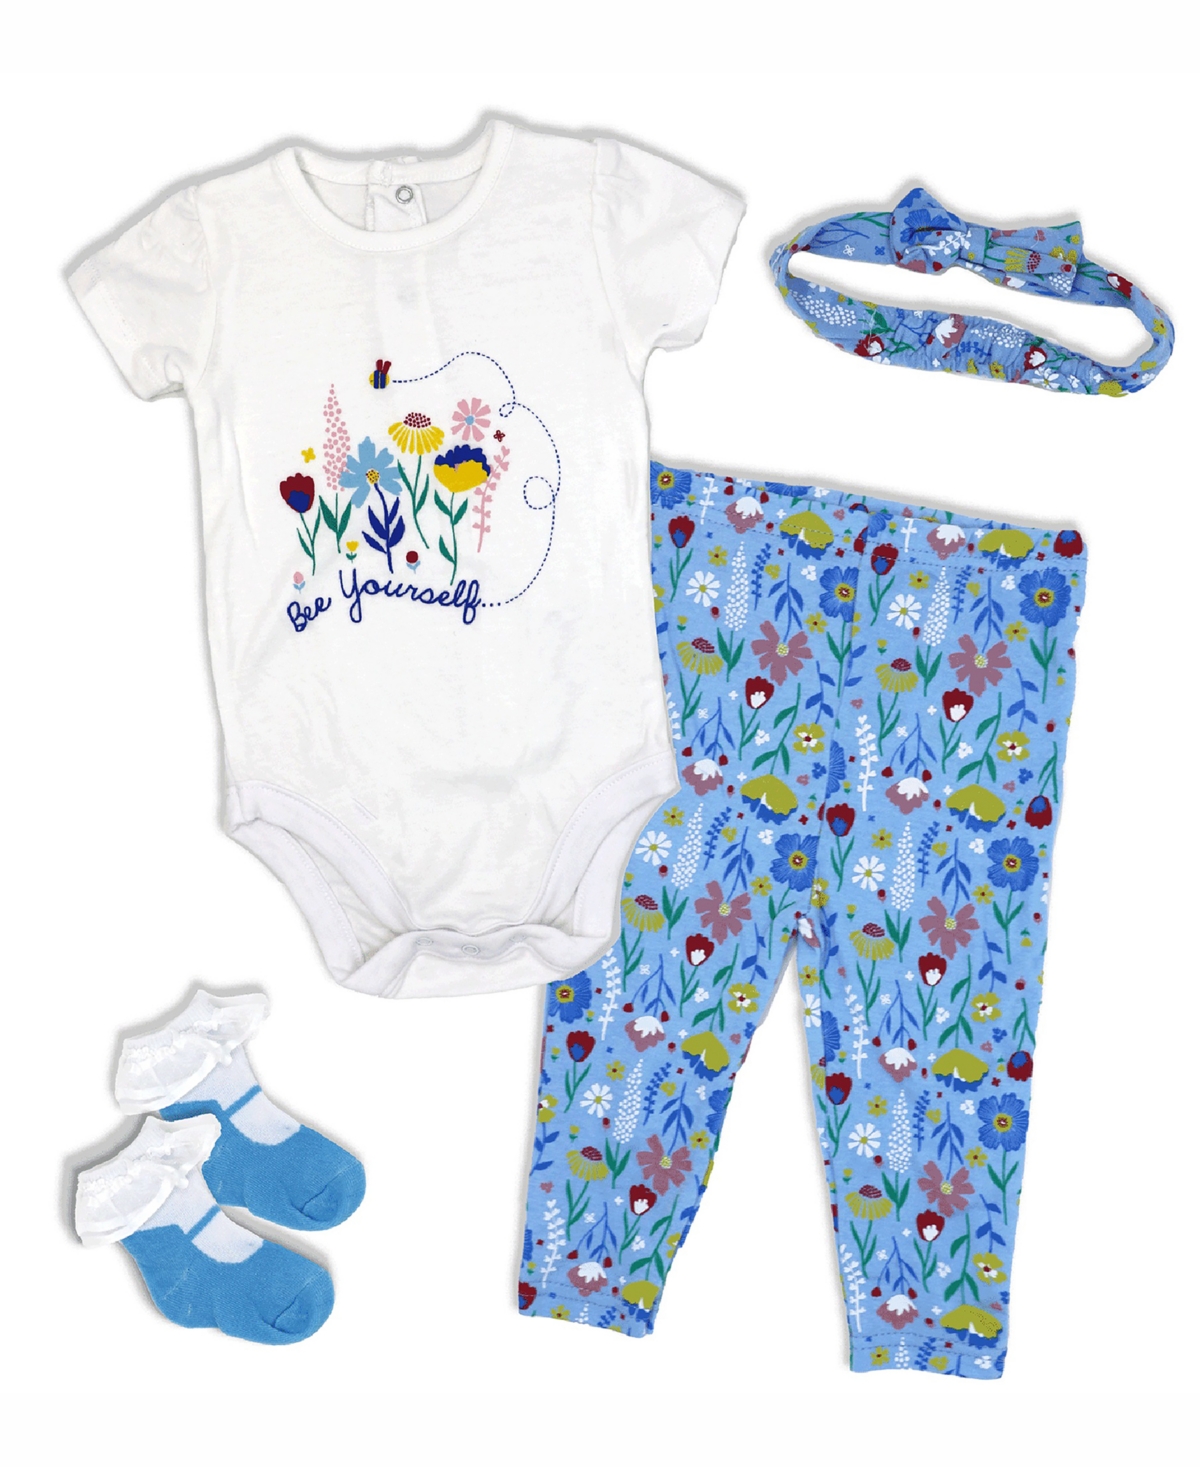 Lily & Jack Baby Girls Bee Yourself Bodysuit, Leggings, Socks And Headband, 4 Piece Set In White